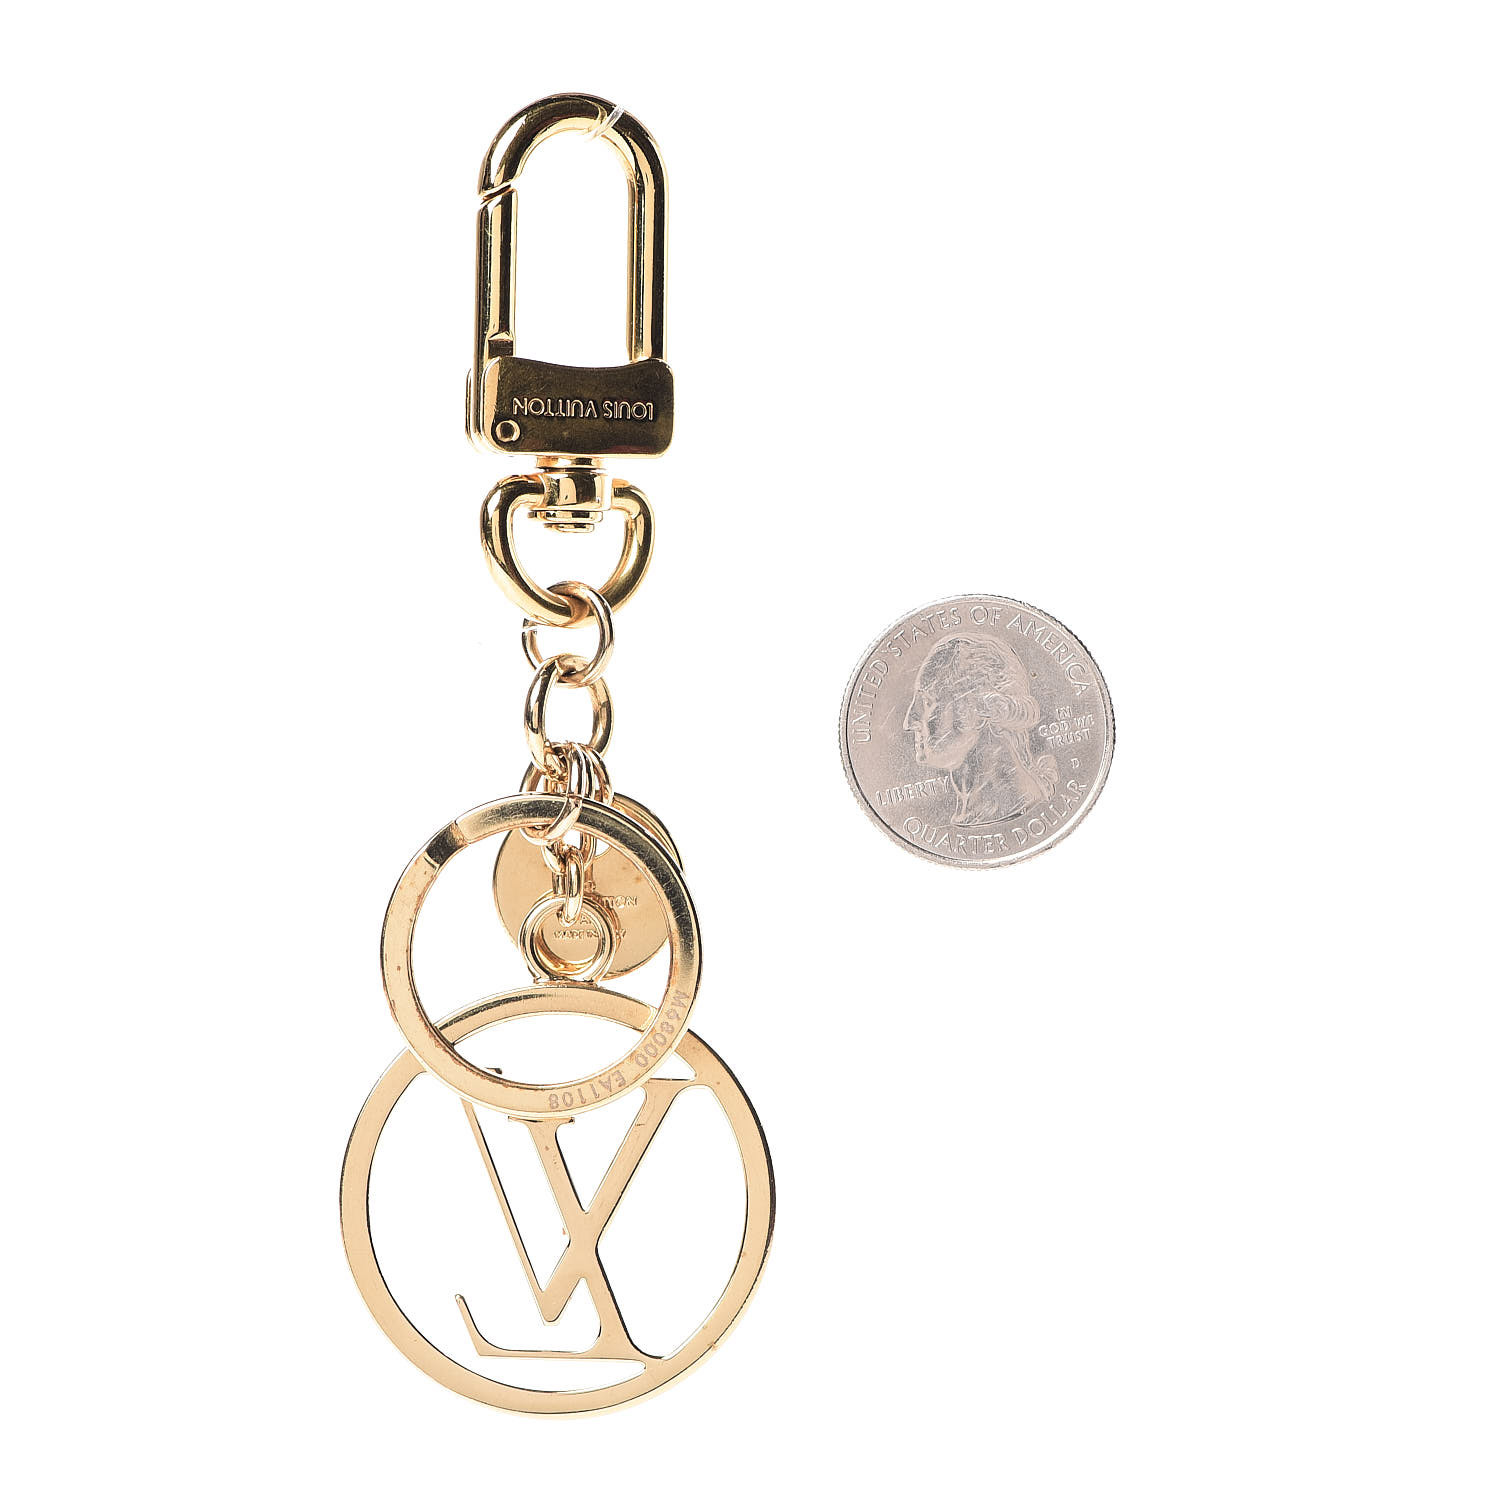 Lv Coin Purse Keychain  Natural Resource Department